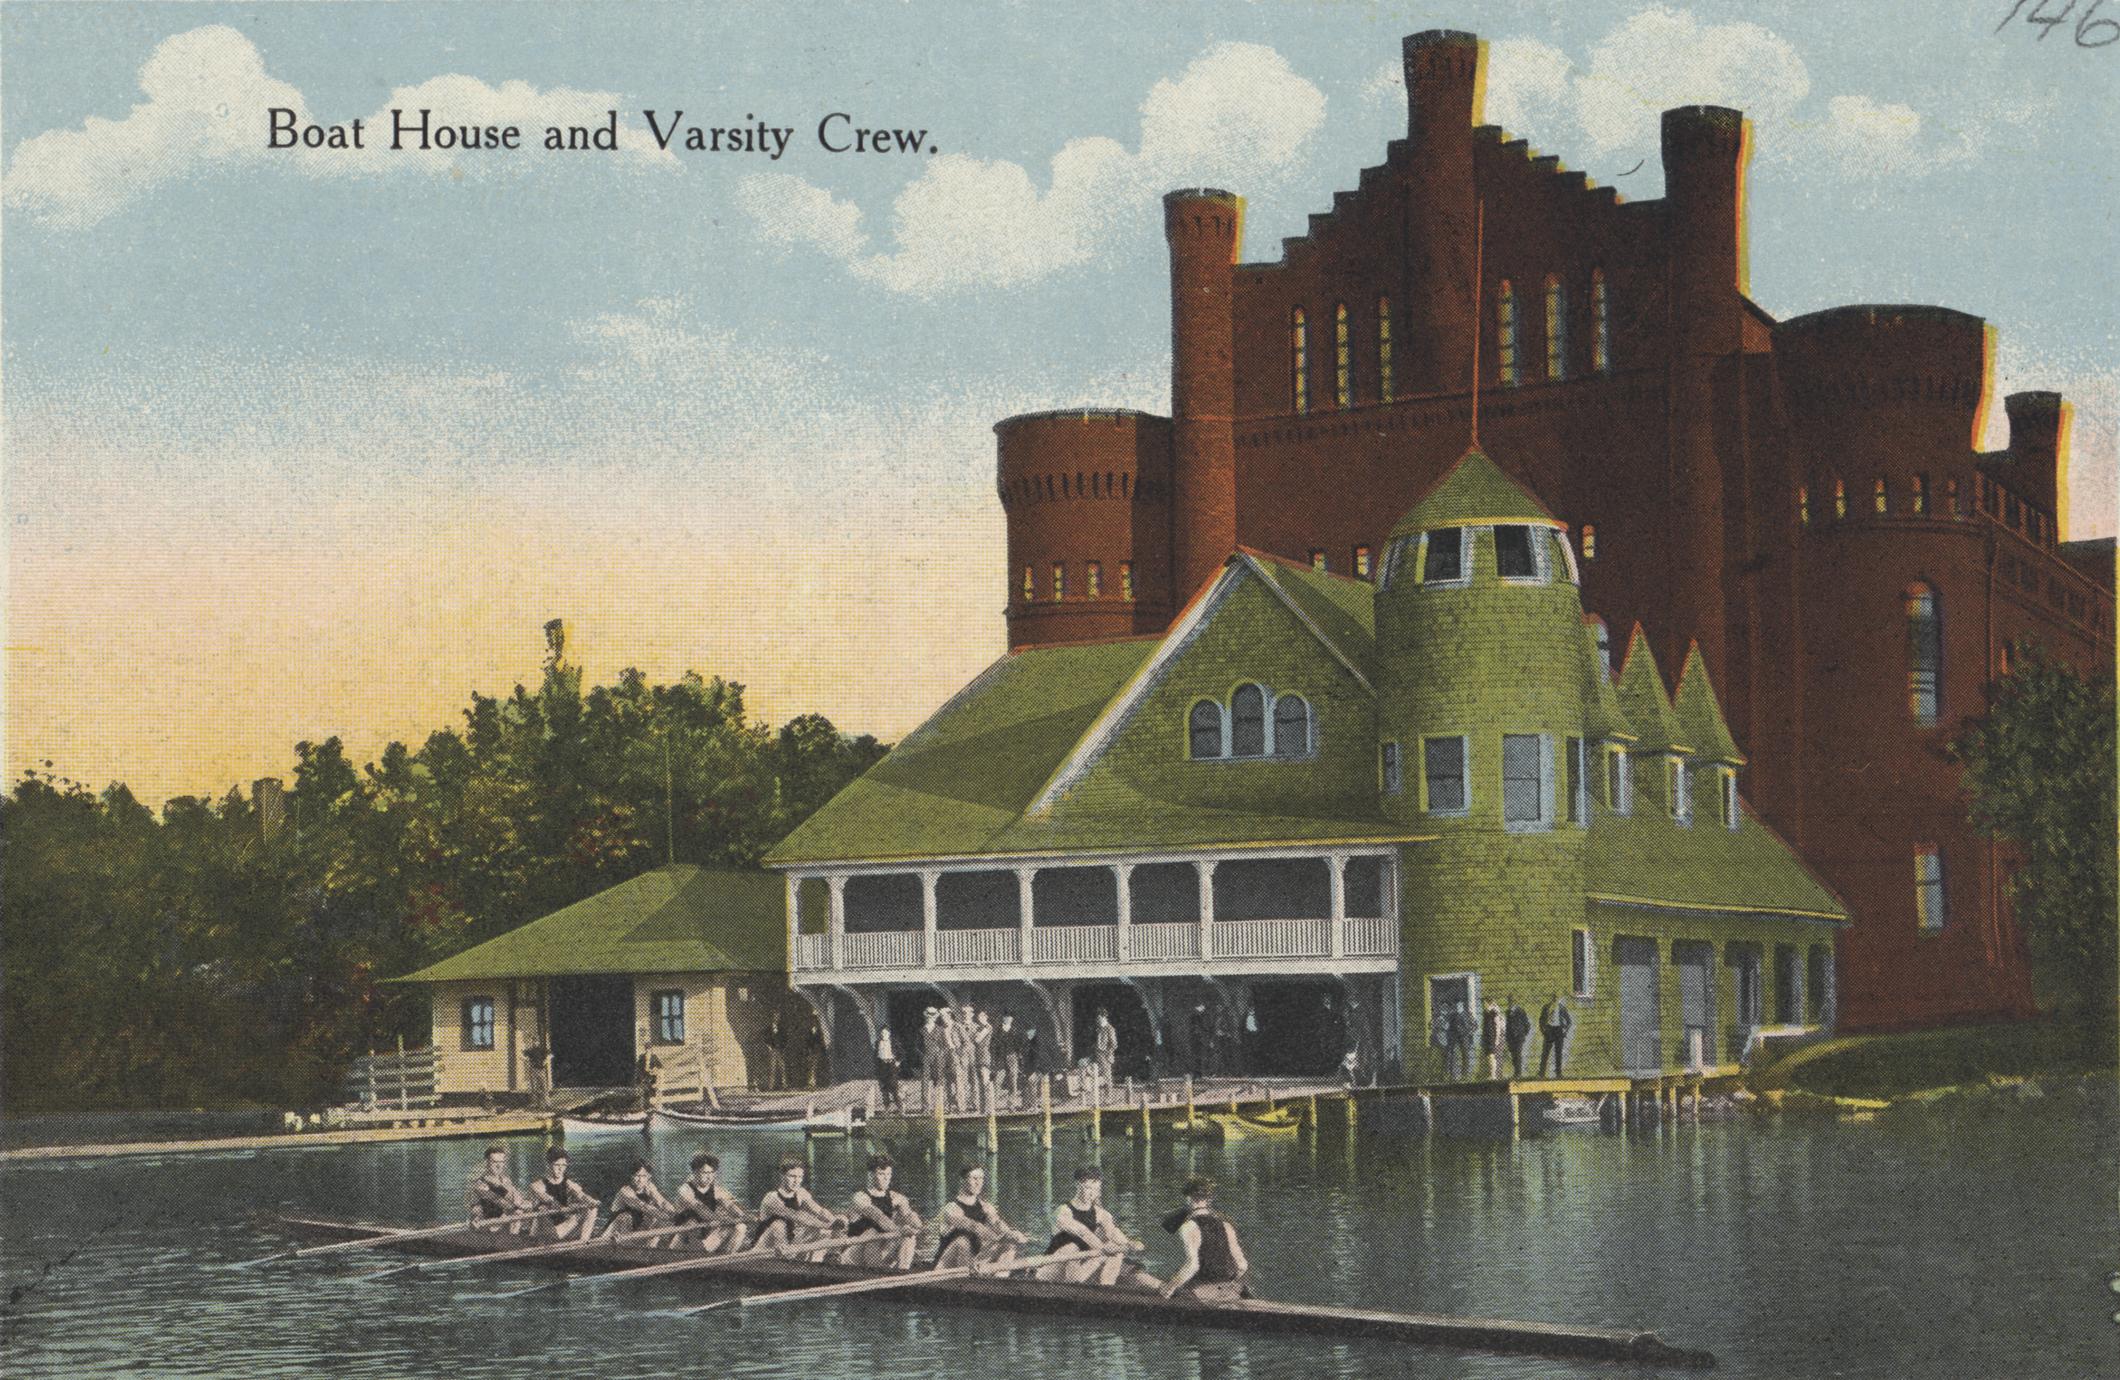 A colorized photo with a crew team rowing on a lake in front of a green boathouse and red brick gym building